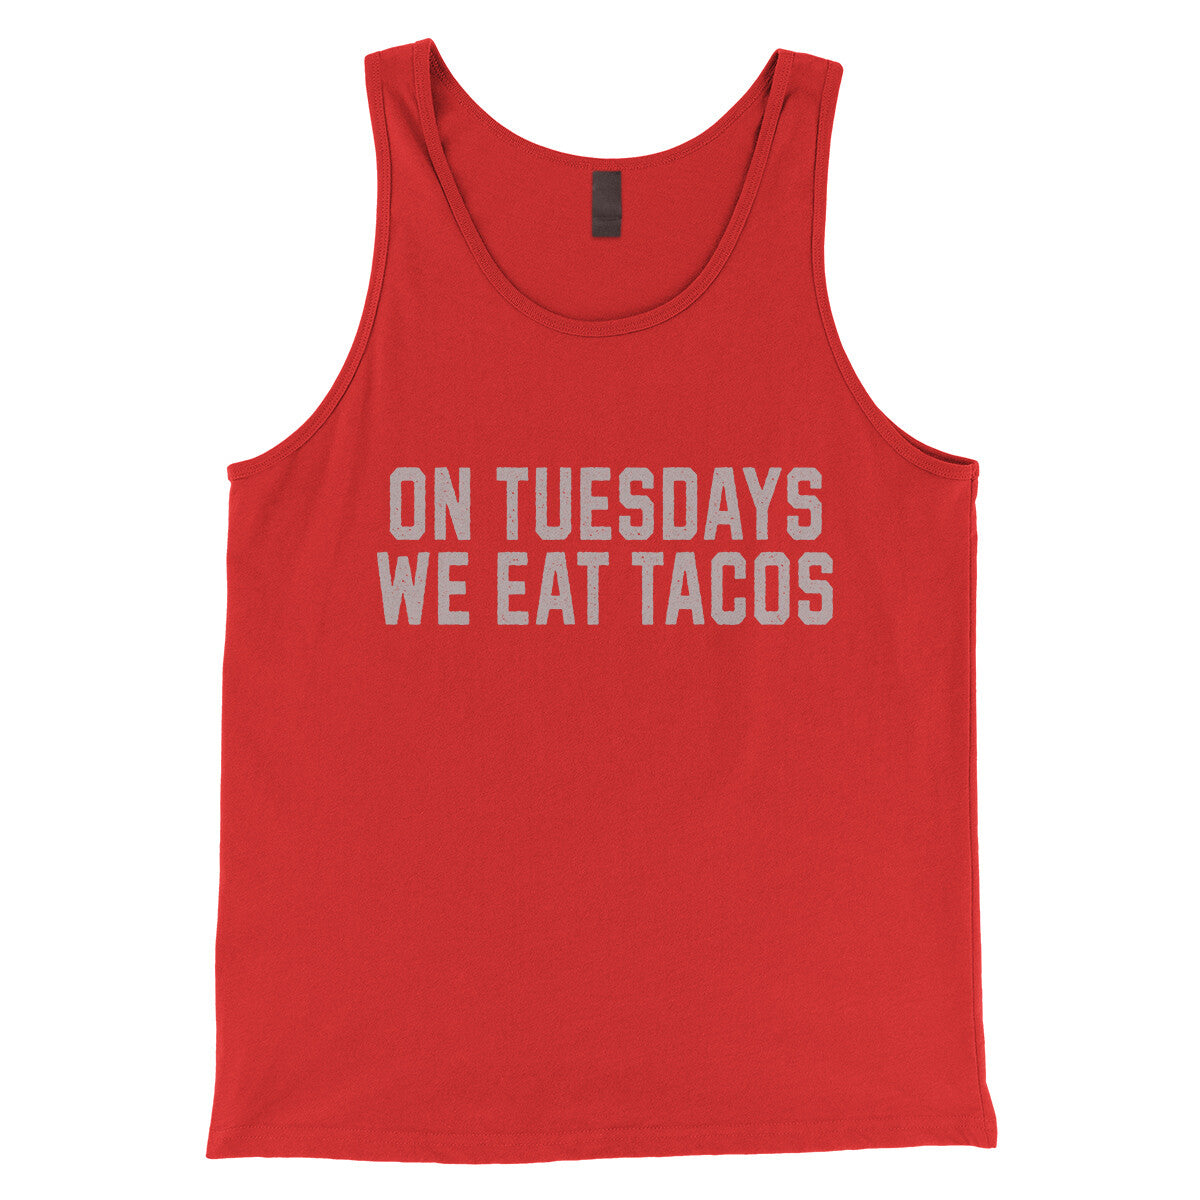 On Tuesdays We Eat Tacos in Red Color